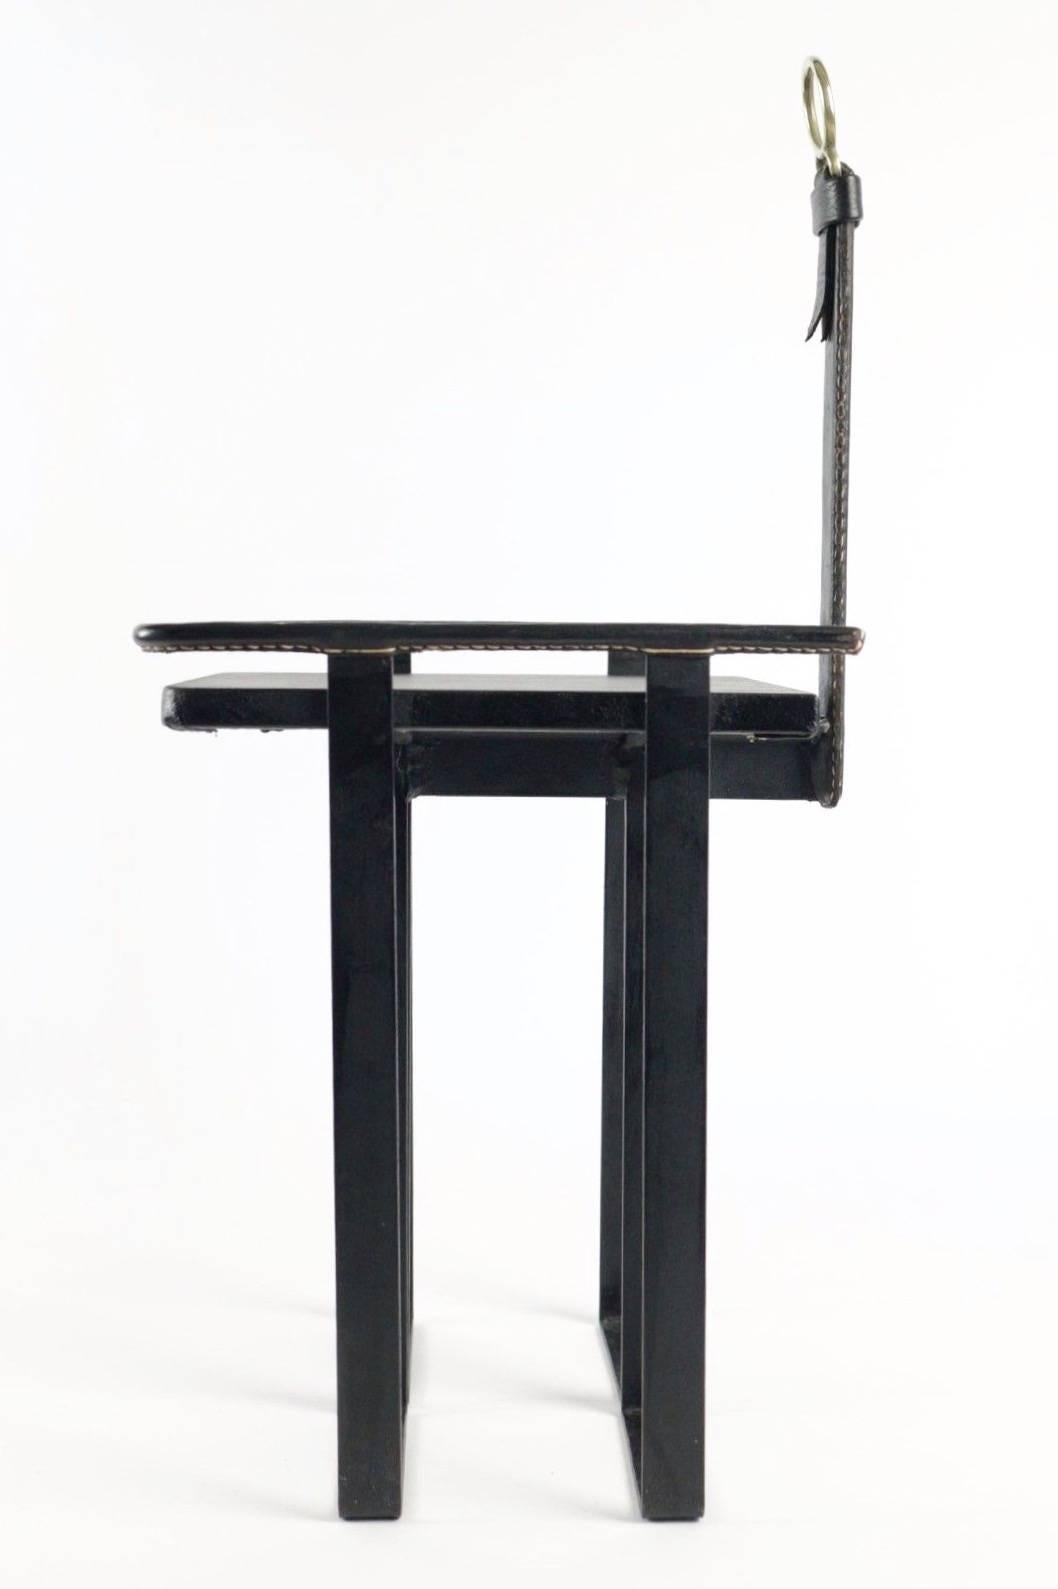 Rare leather and iron table by French designer Jacques Adnet. Perfect table for your phone or books. Black leather in good vintage condition with characteristic Adnet contrast stitching.

 